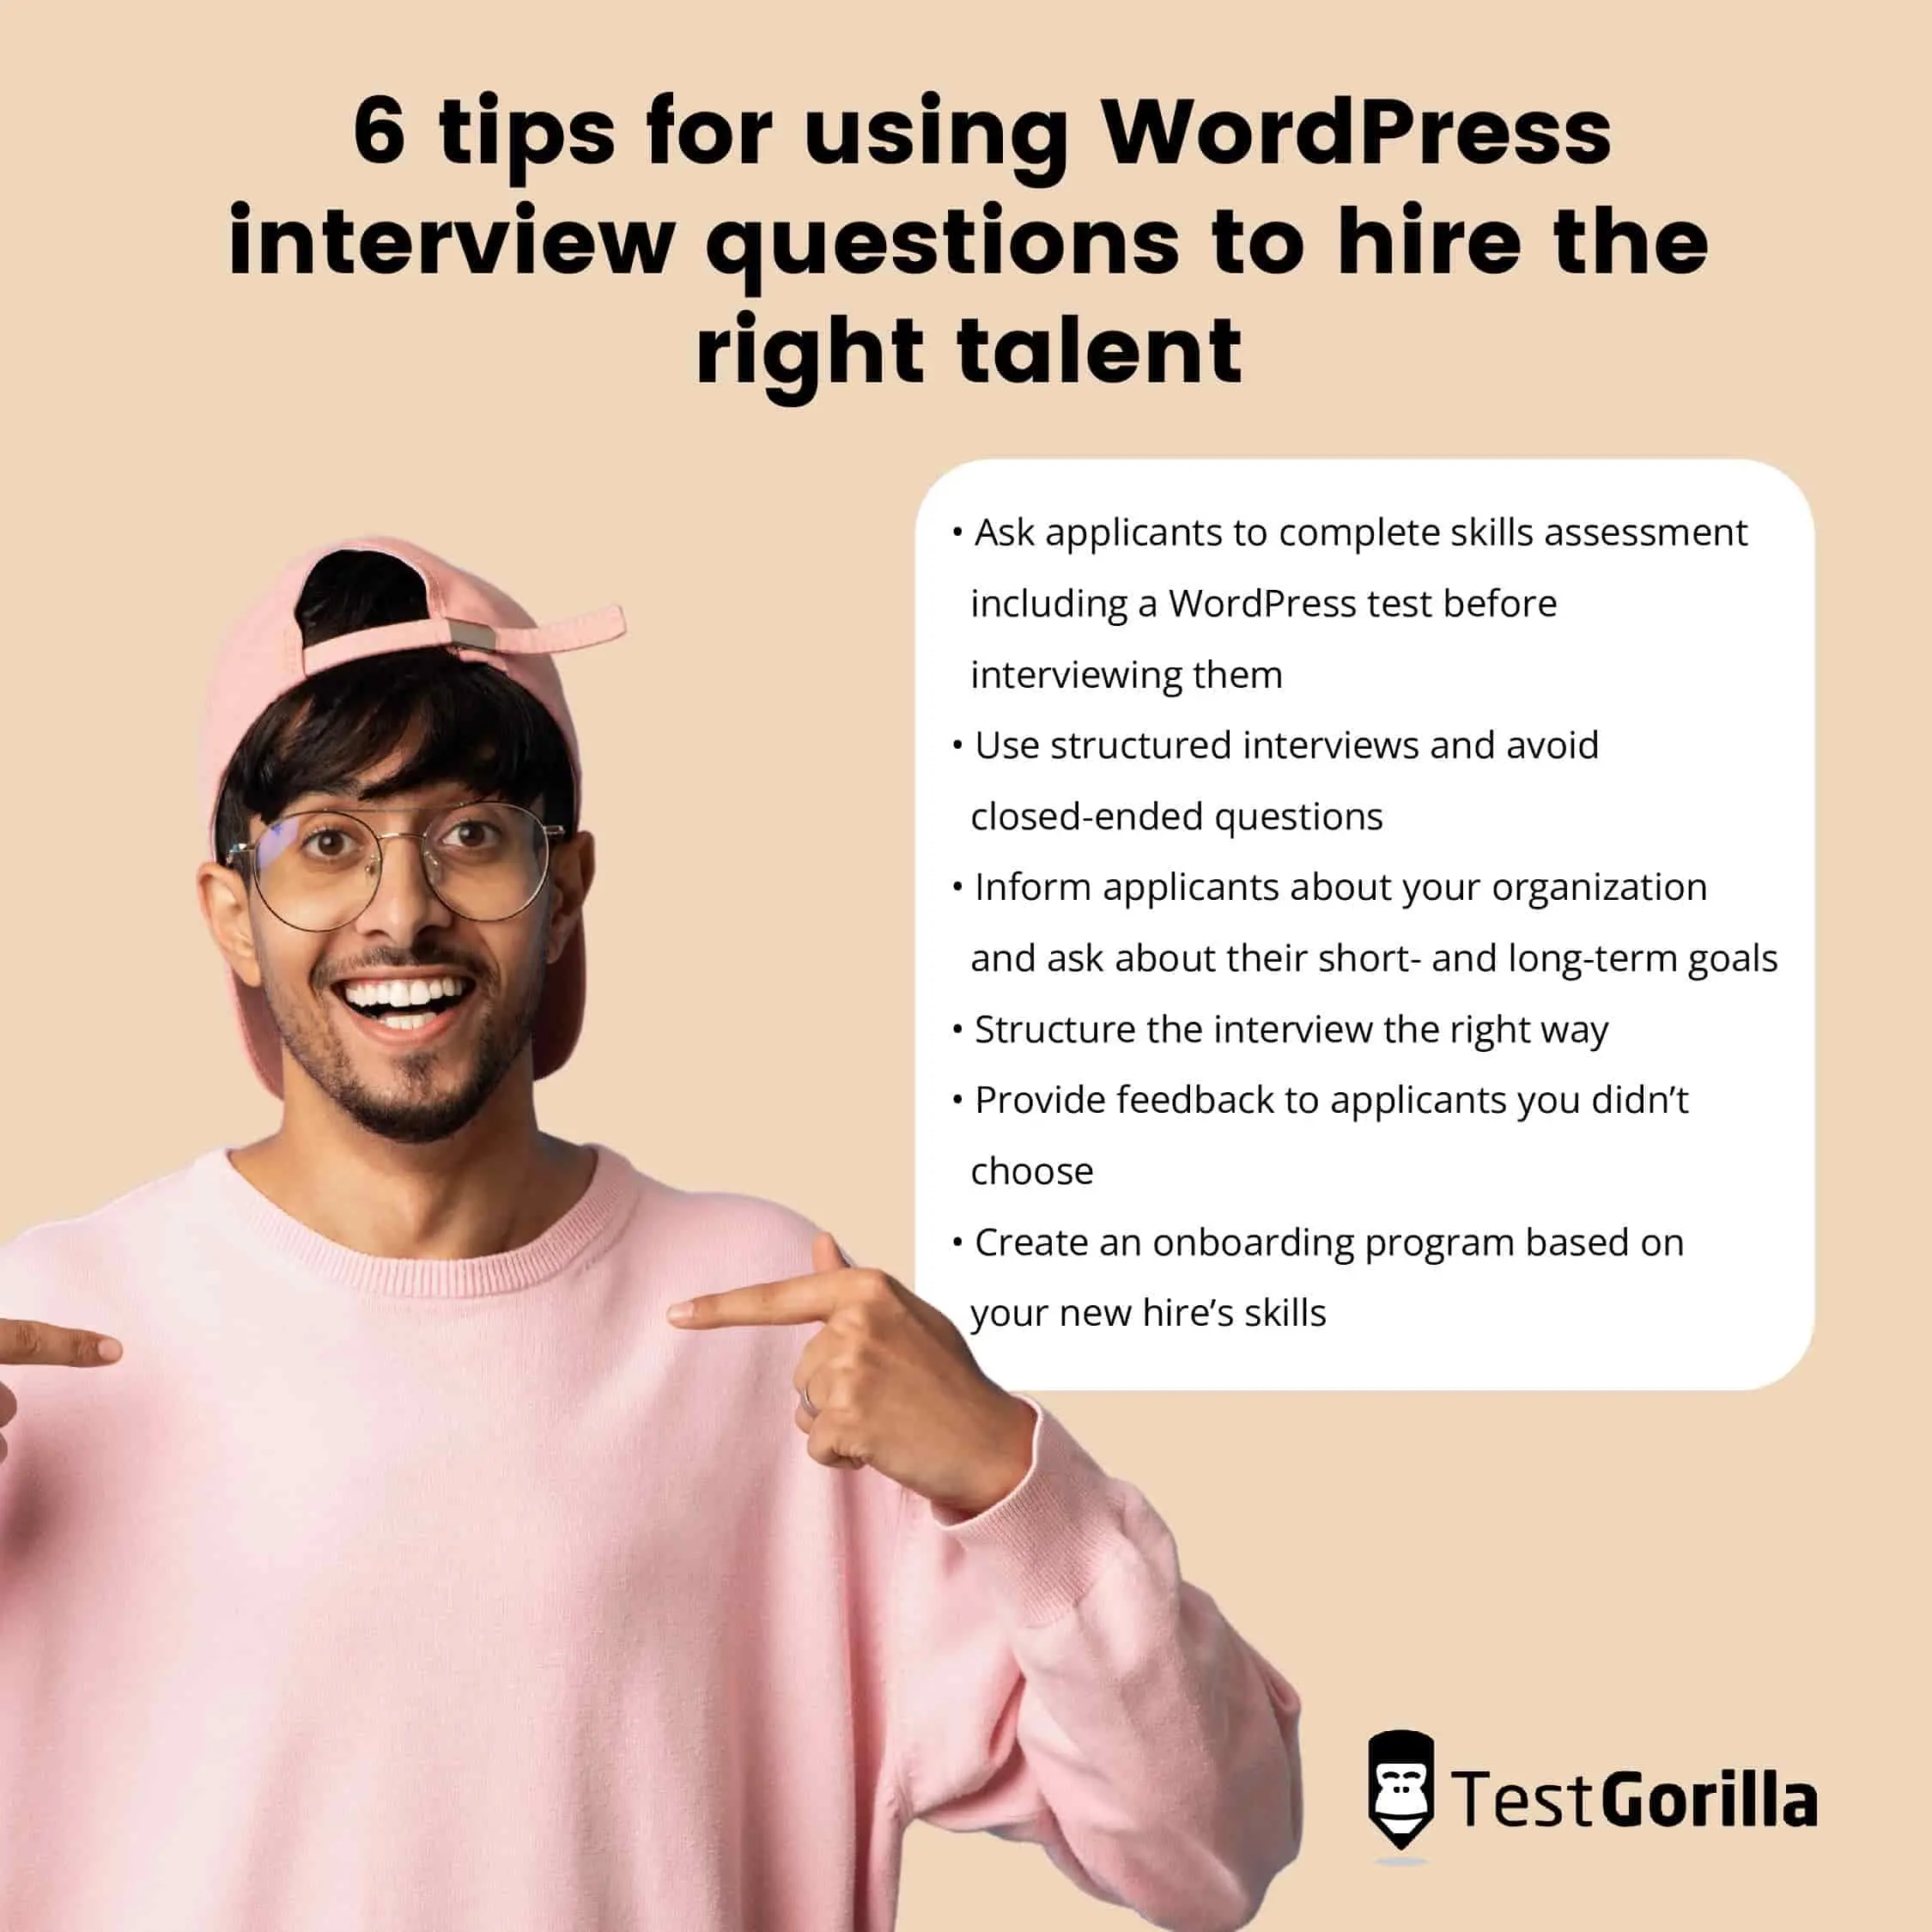 image listing tips for using WordPress interview questions to hire the right talent